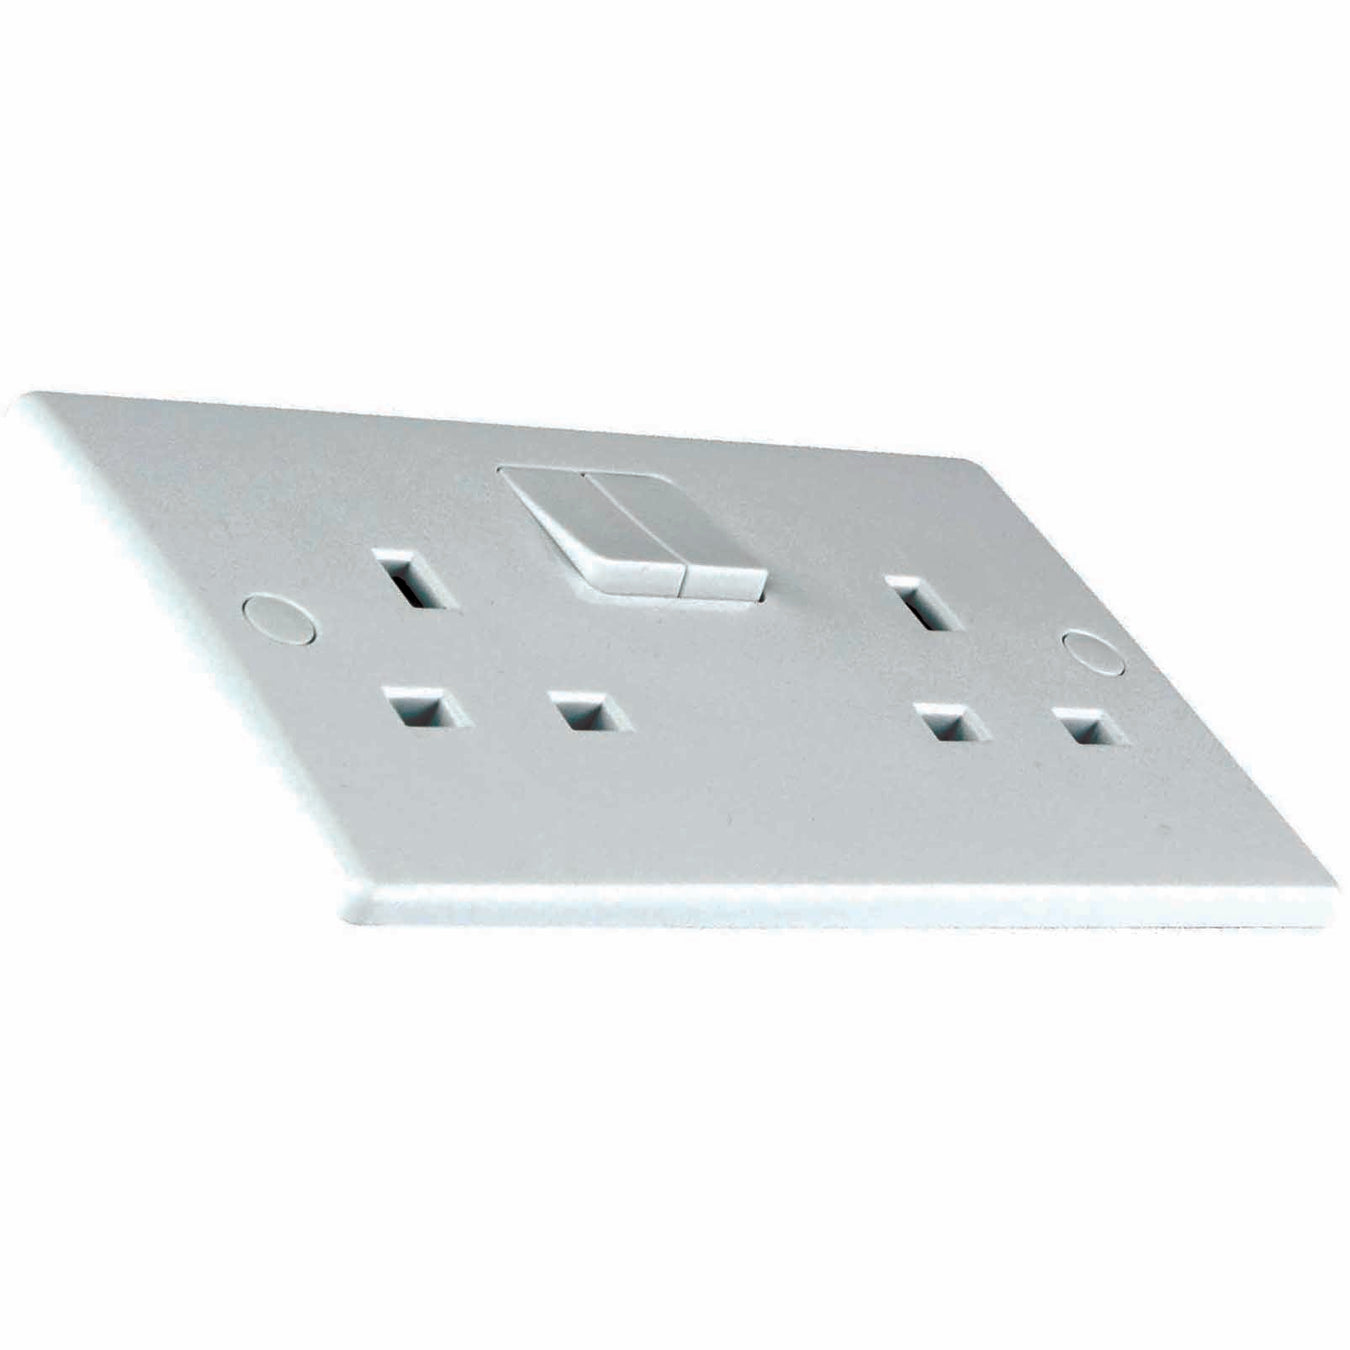 White Light Switches and Sockets